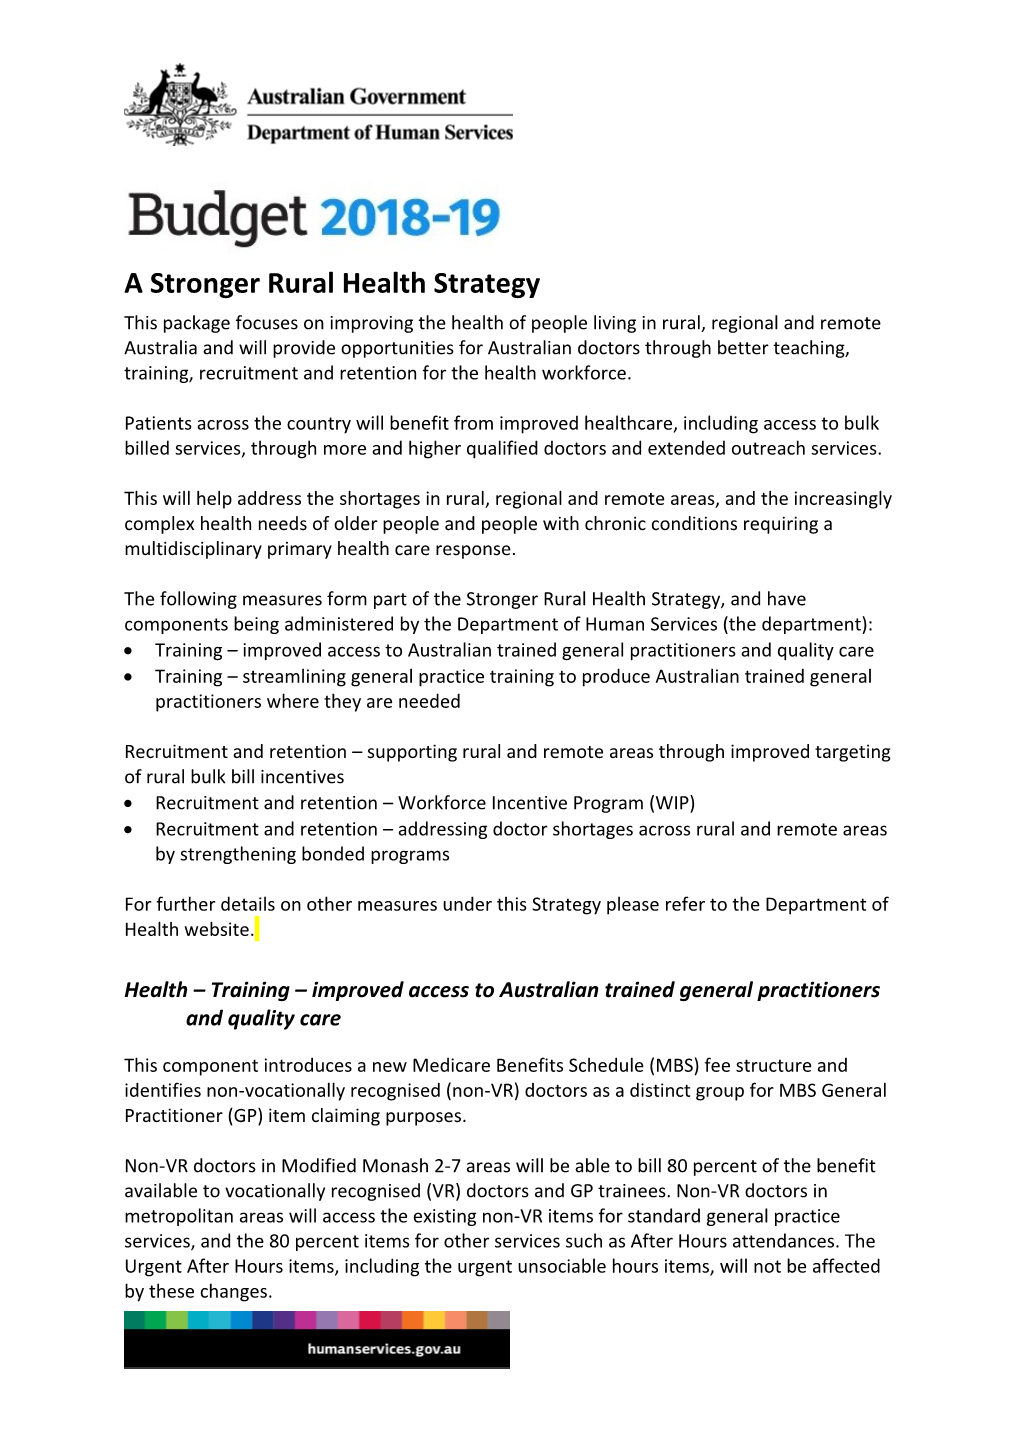 2018-19 Budget - a Stronger Rural Health Strategy